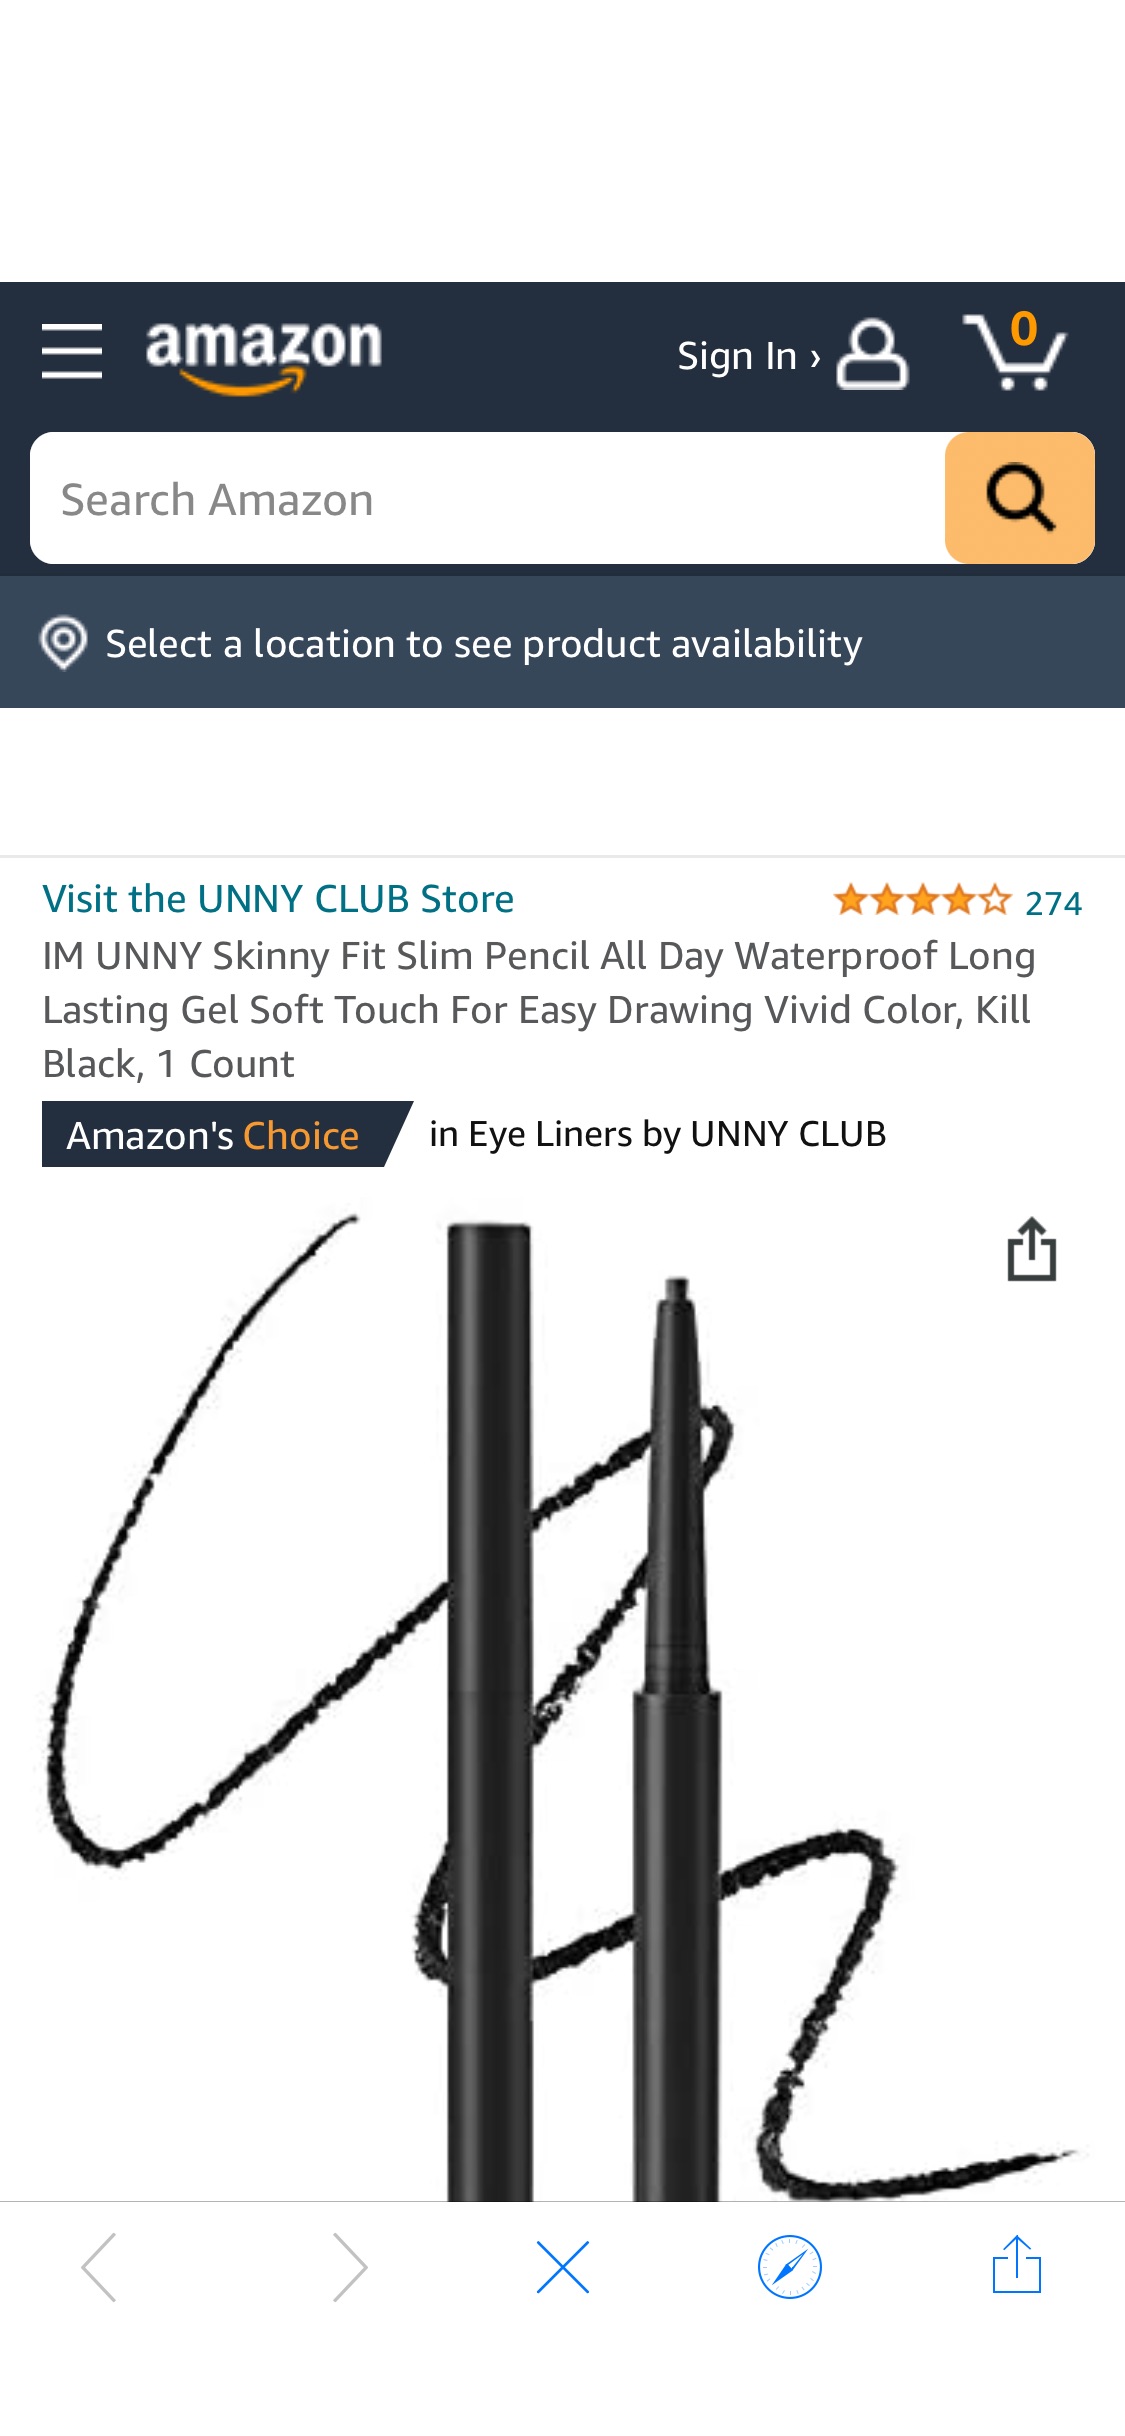 Amazon.com : IM UNNY Skinny Fit Slim Pencil All Day Waterproof Long Lasting Gel Soft Touch For Easy Drawing Vivid Color, Kill Black